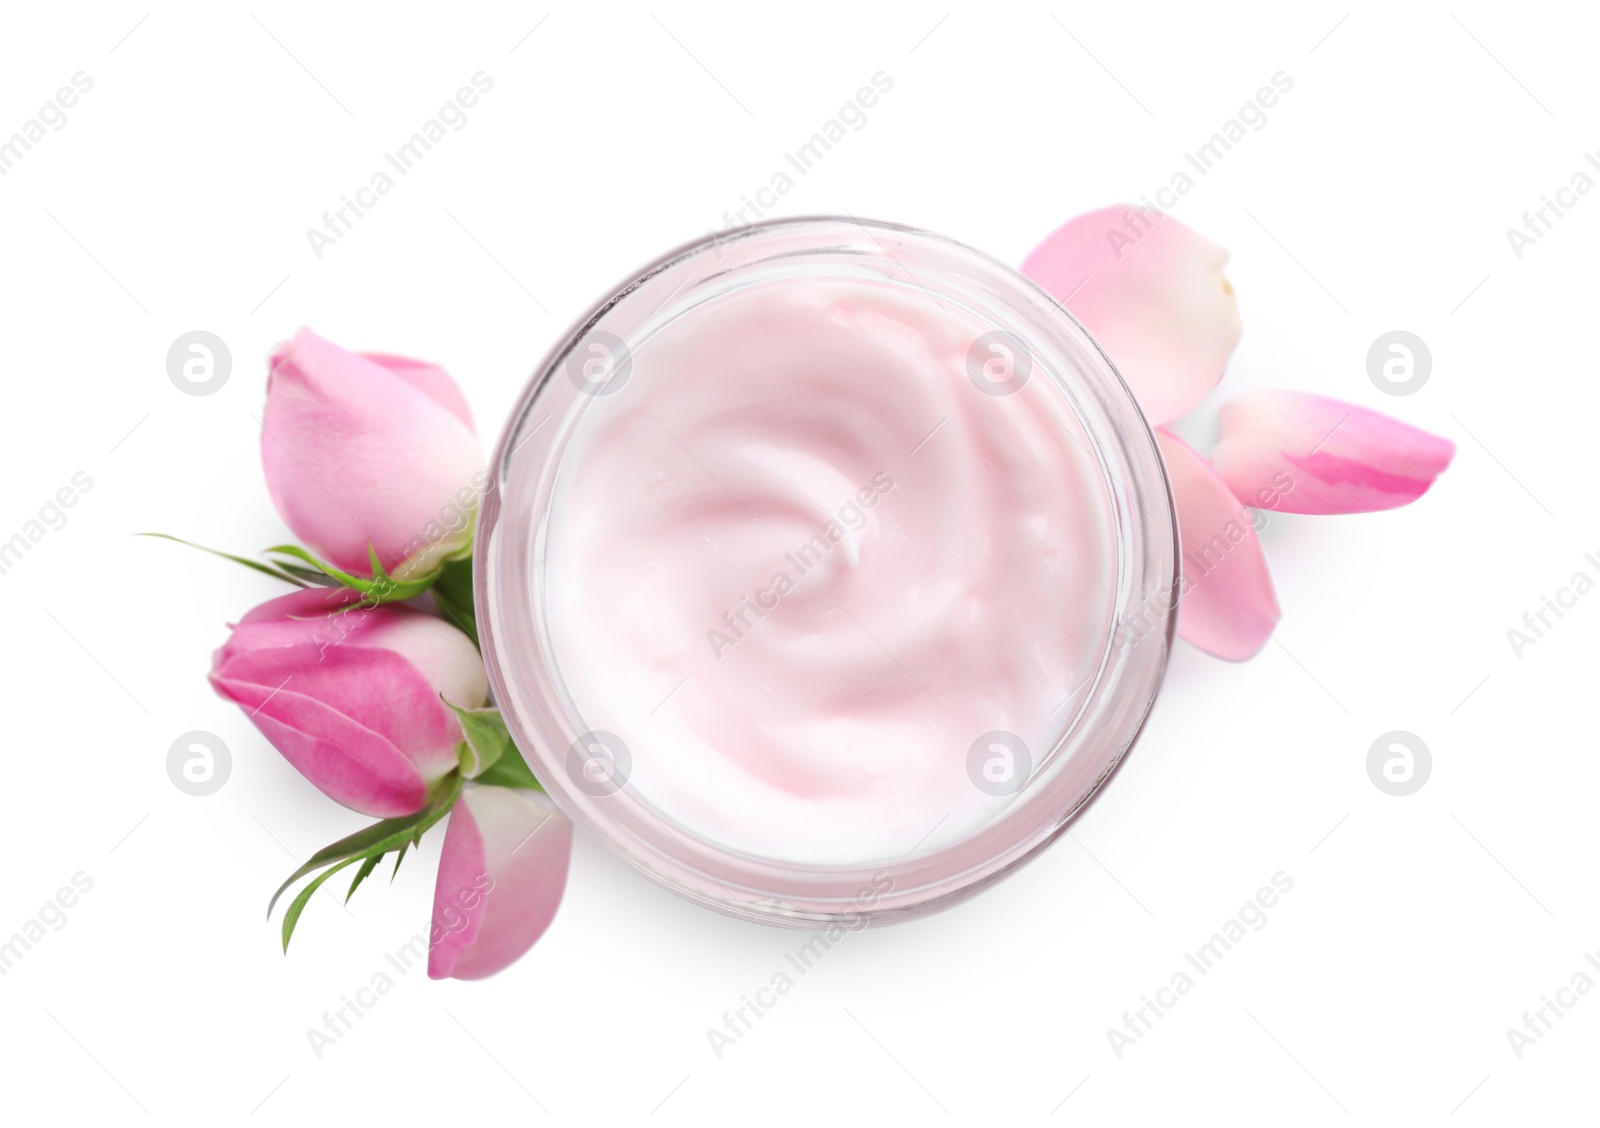 Photo of Jar of hand cream and roses on white background, top view